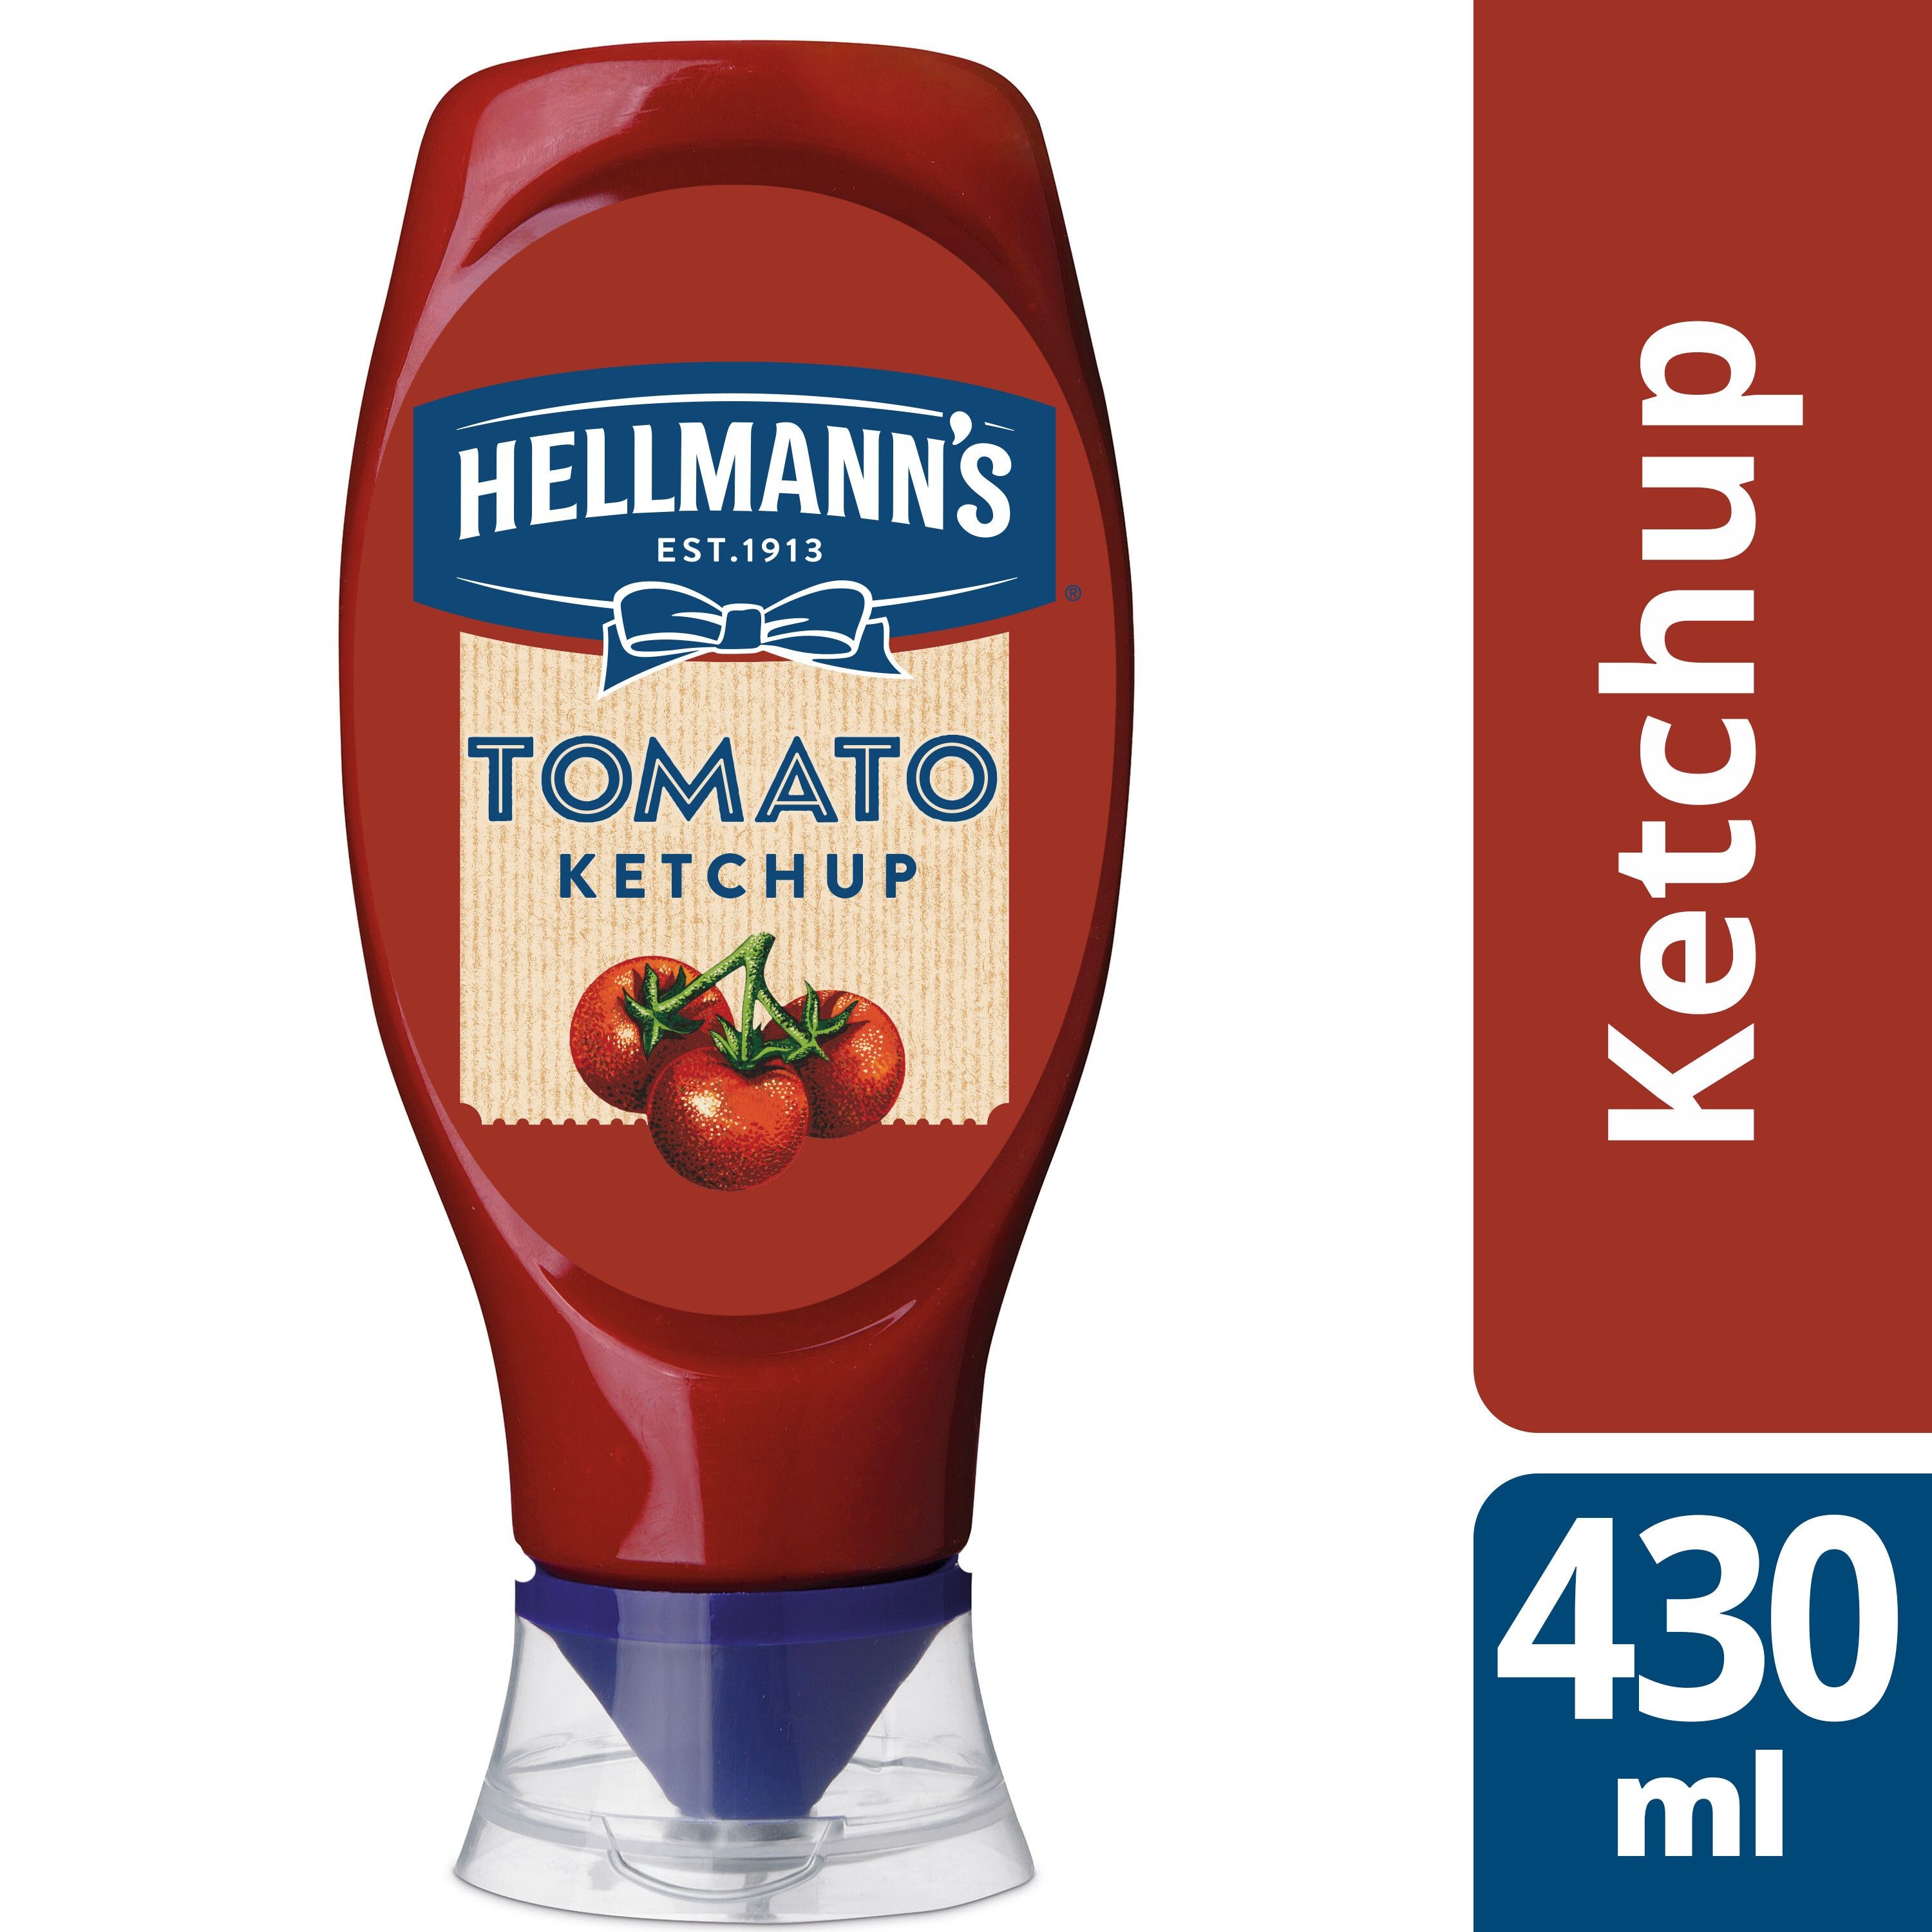 Hellmann's tomato ketchup 430ml squeeze bottle